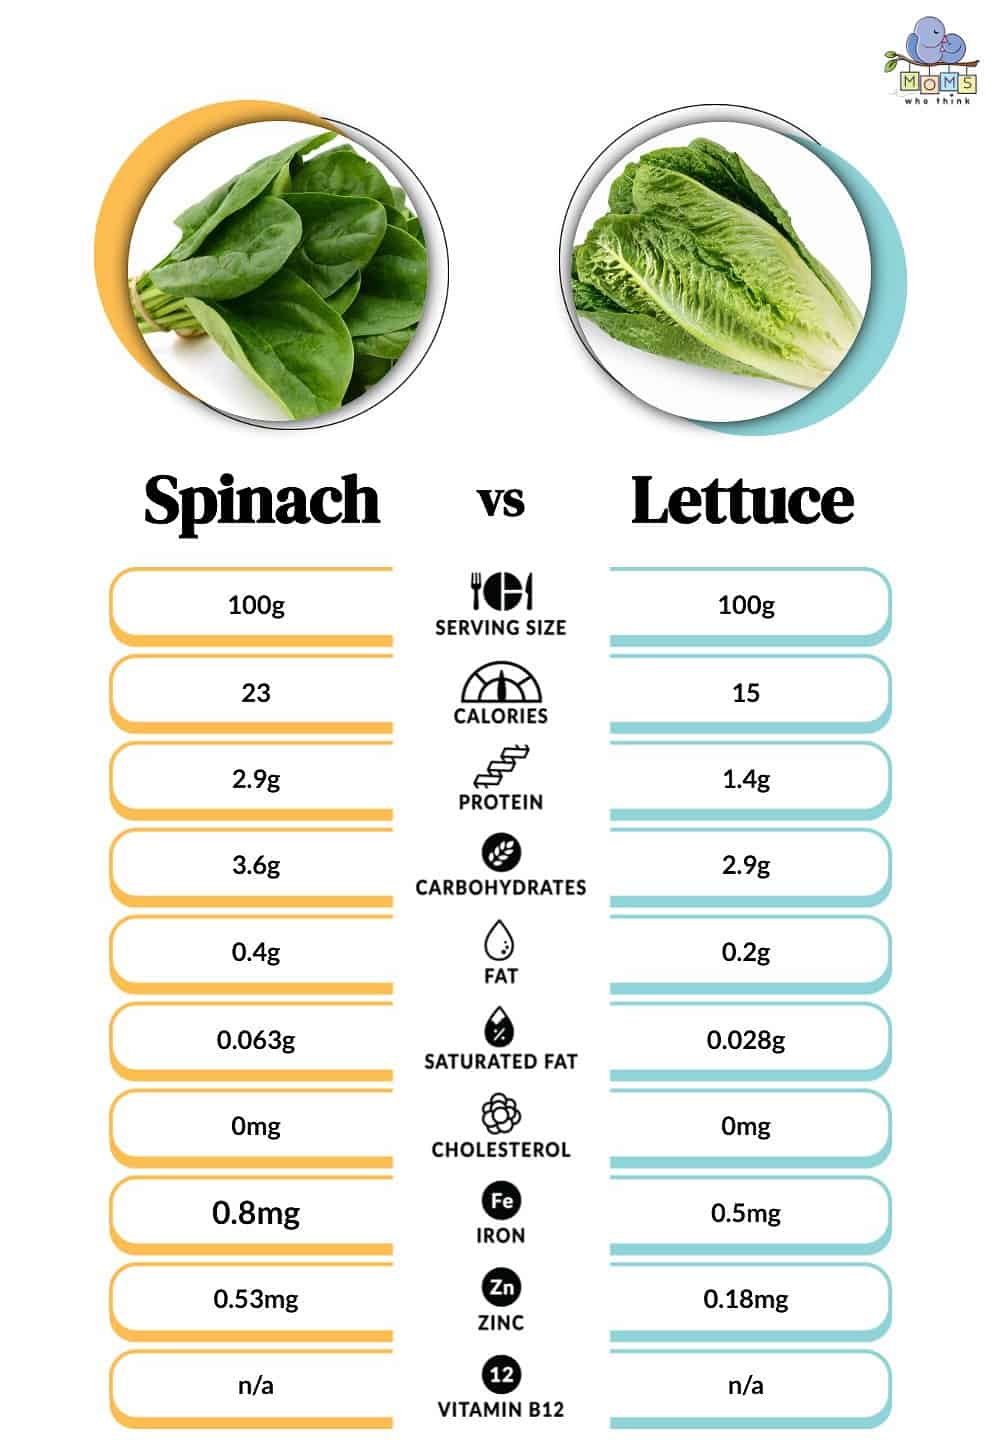 Spinach vs Lettuce Nutritional Facts